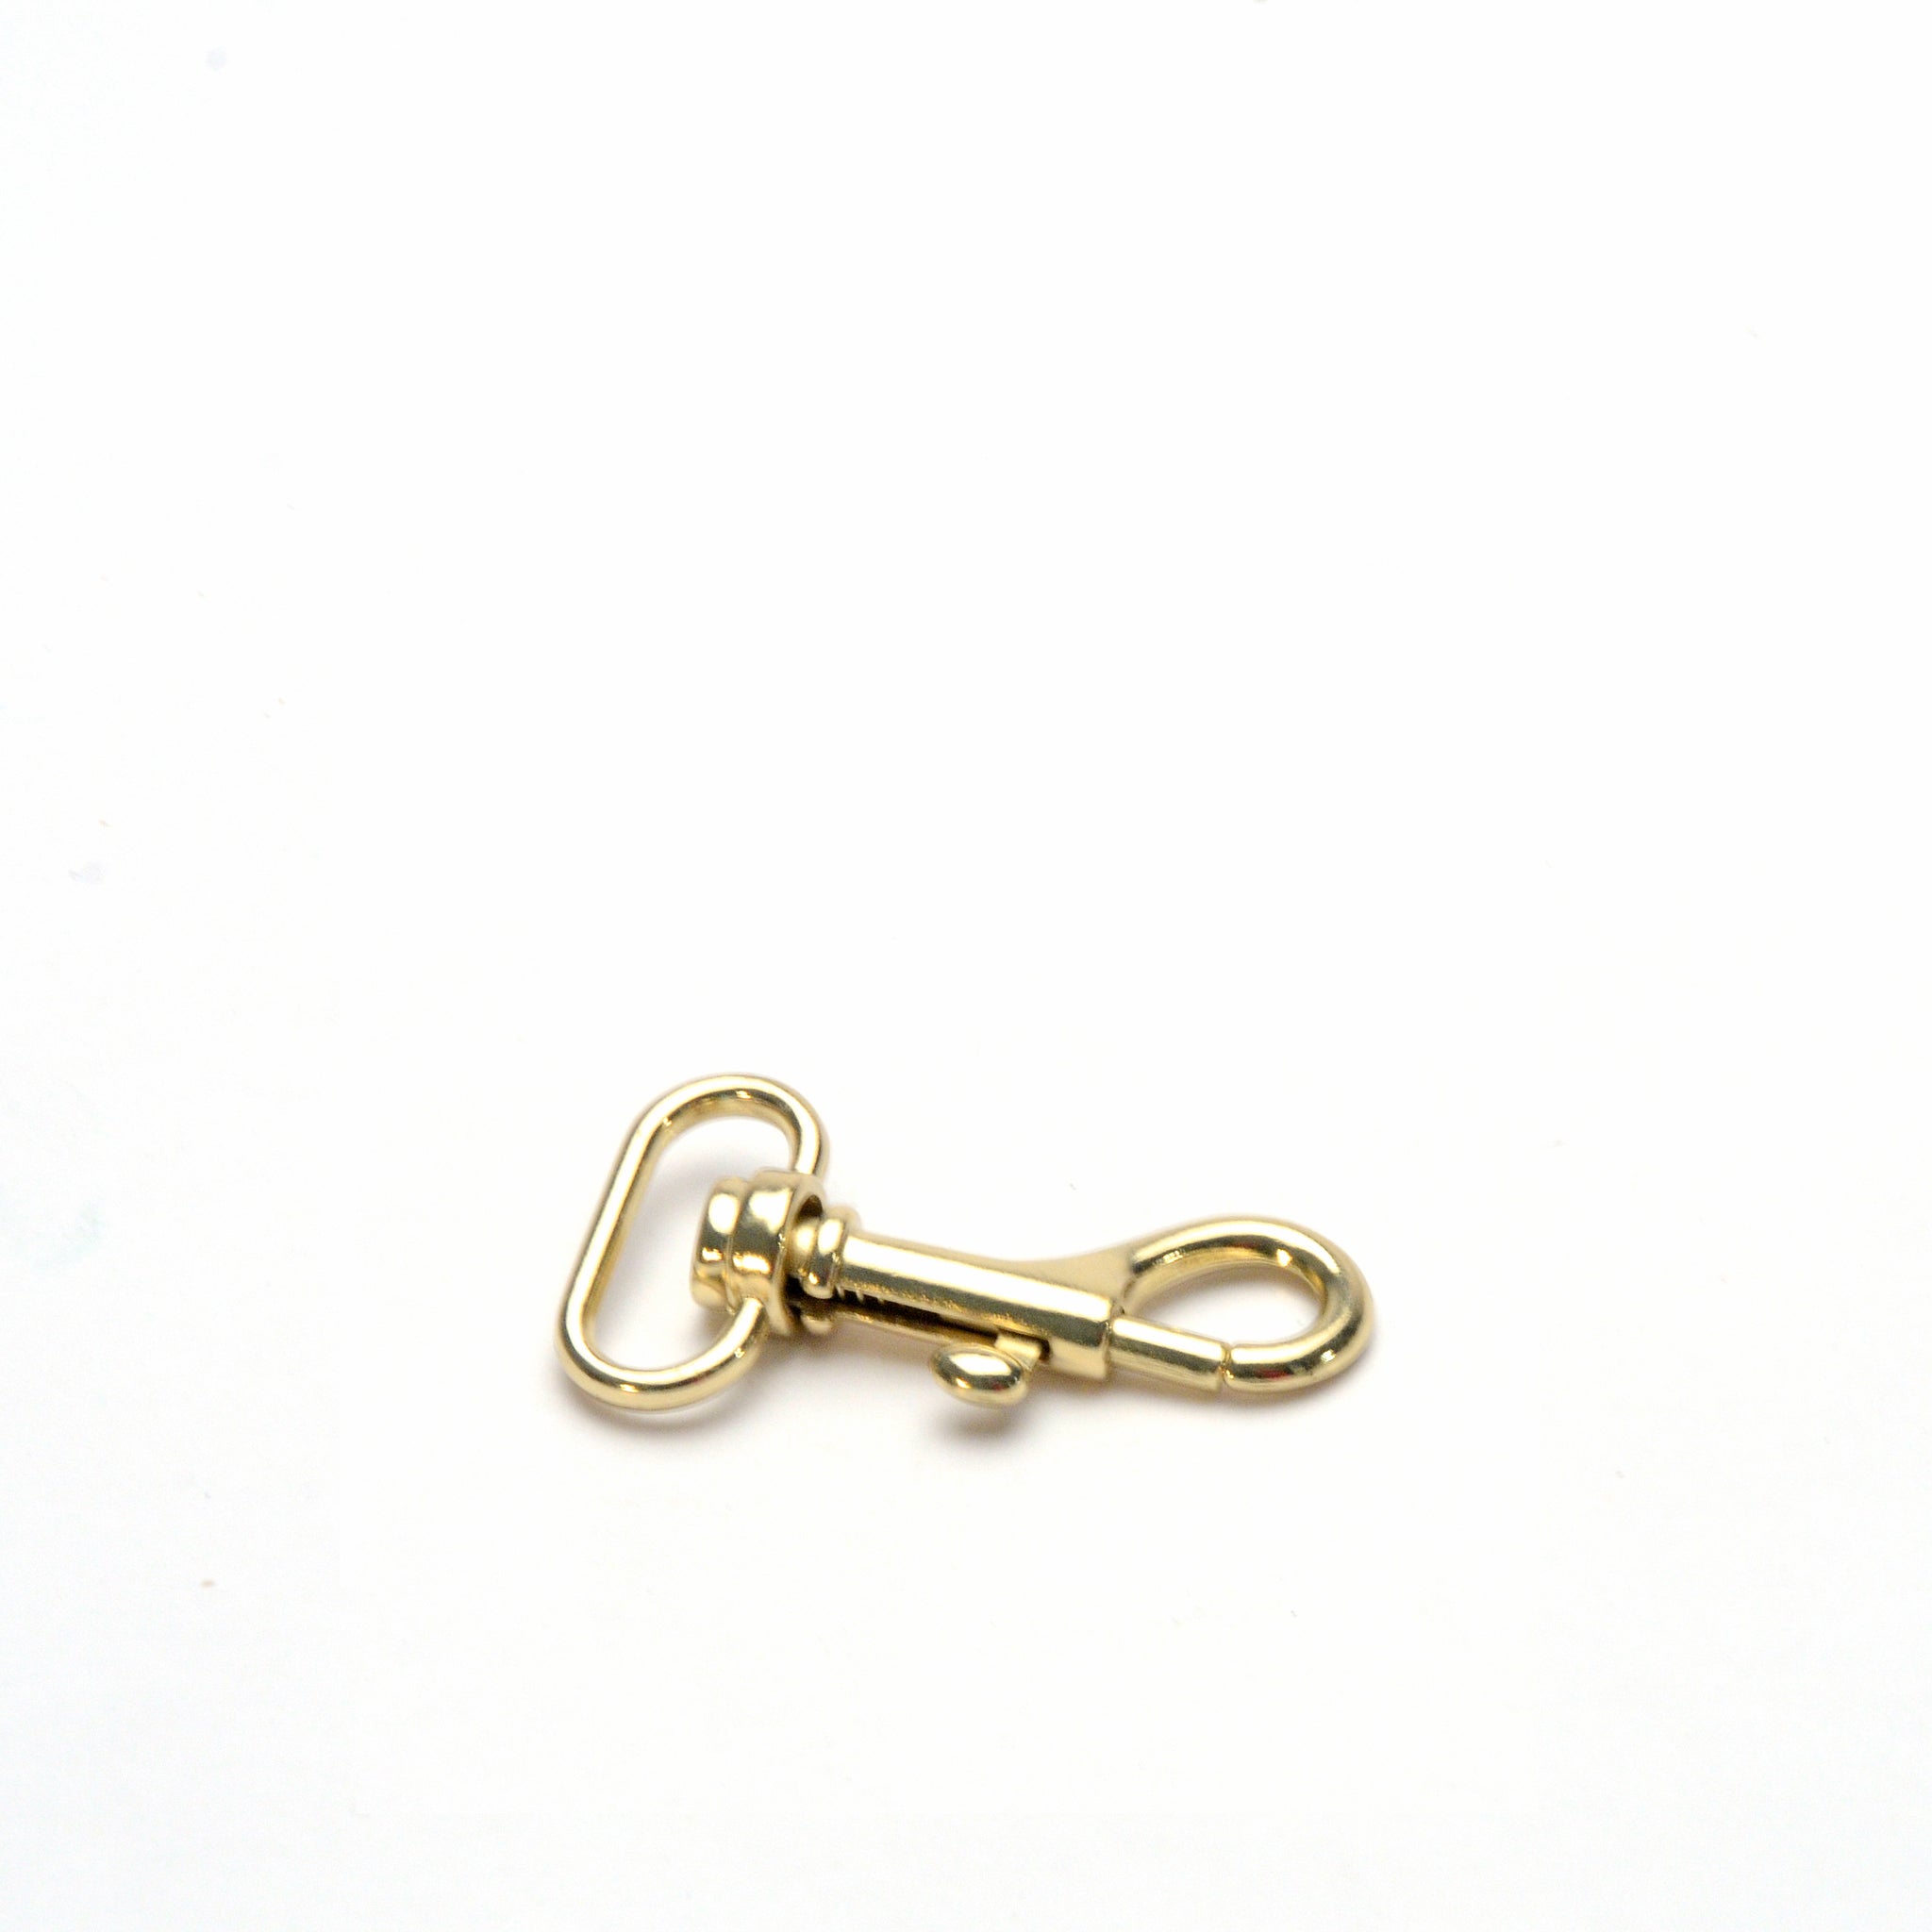 16mm Bag/All Purpose Swivel Clip - Brass from Identity Leathercraft